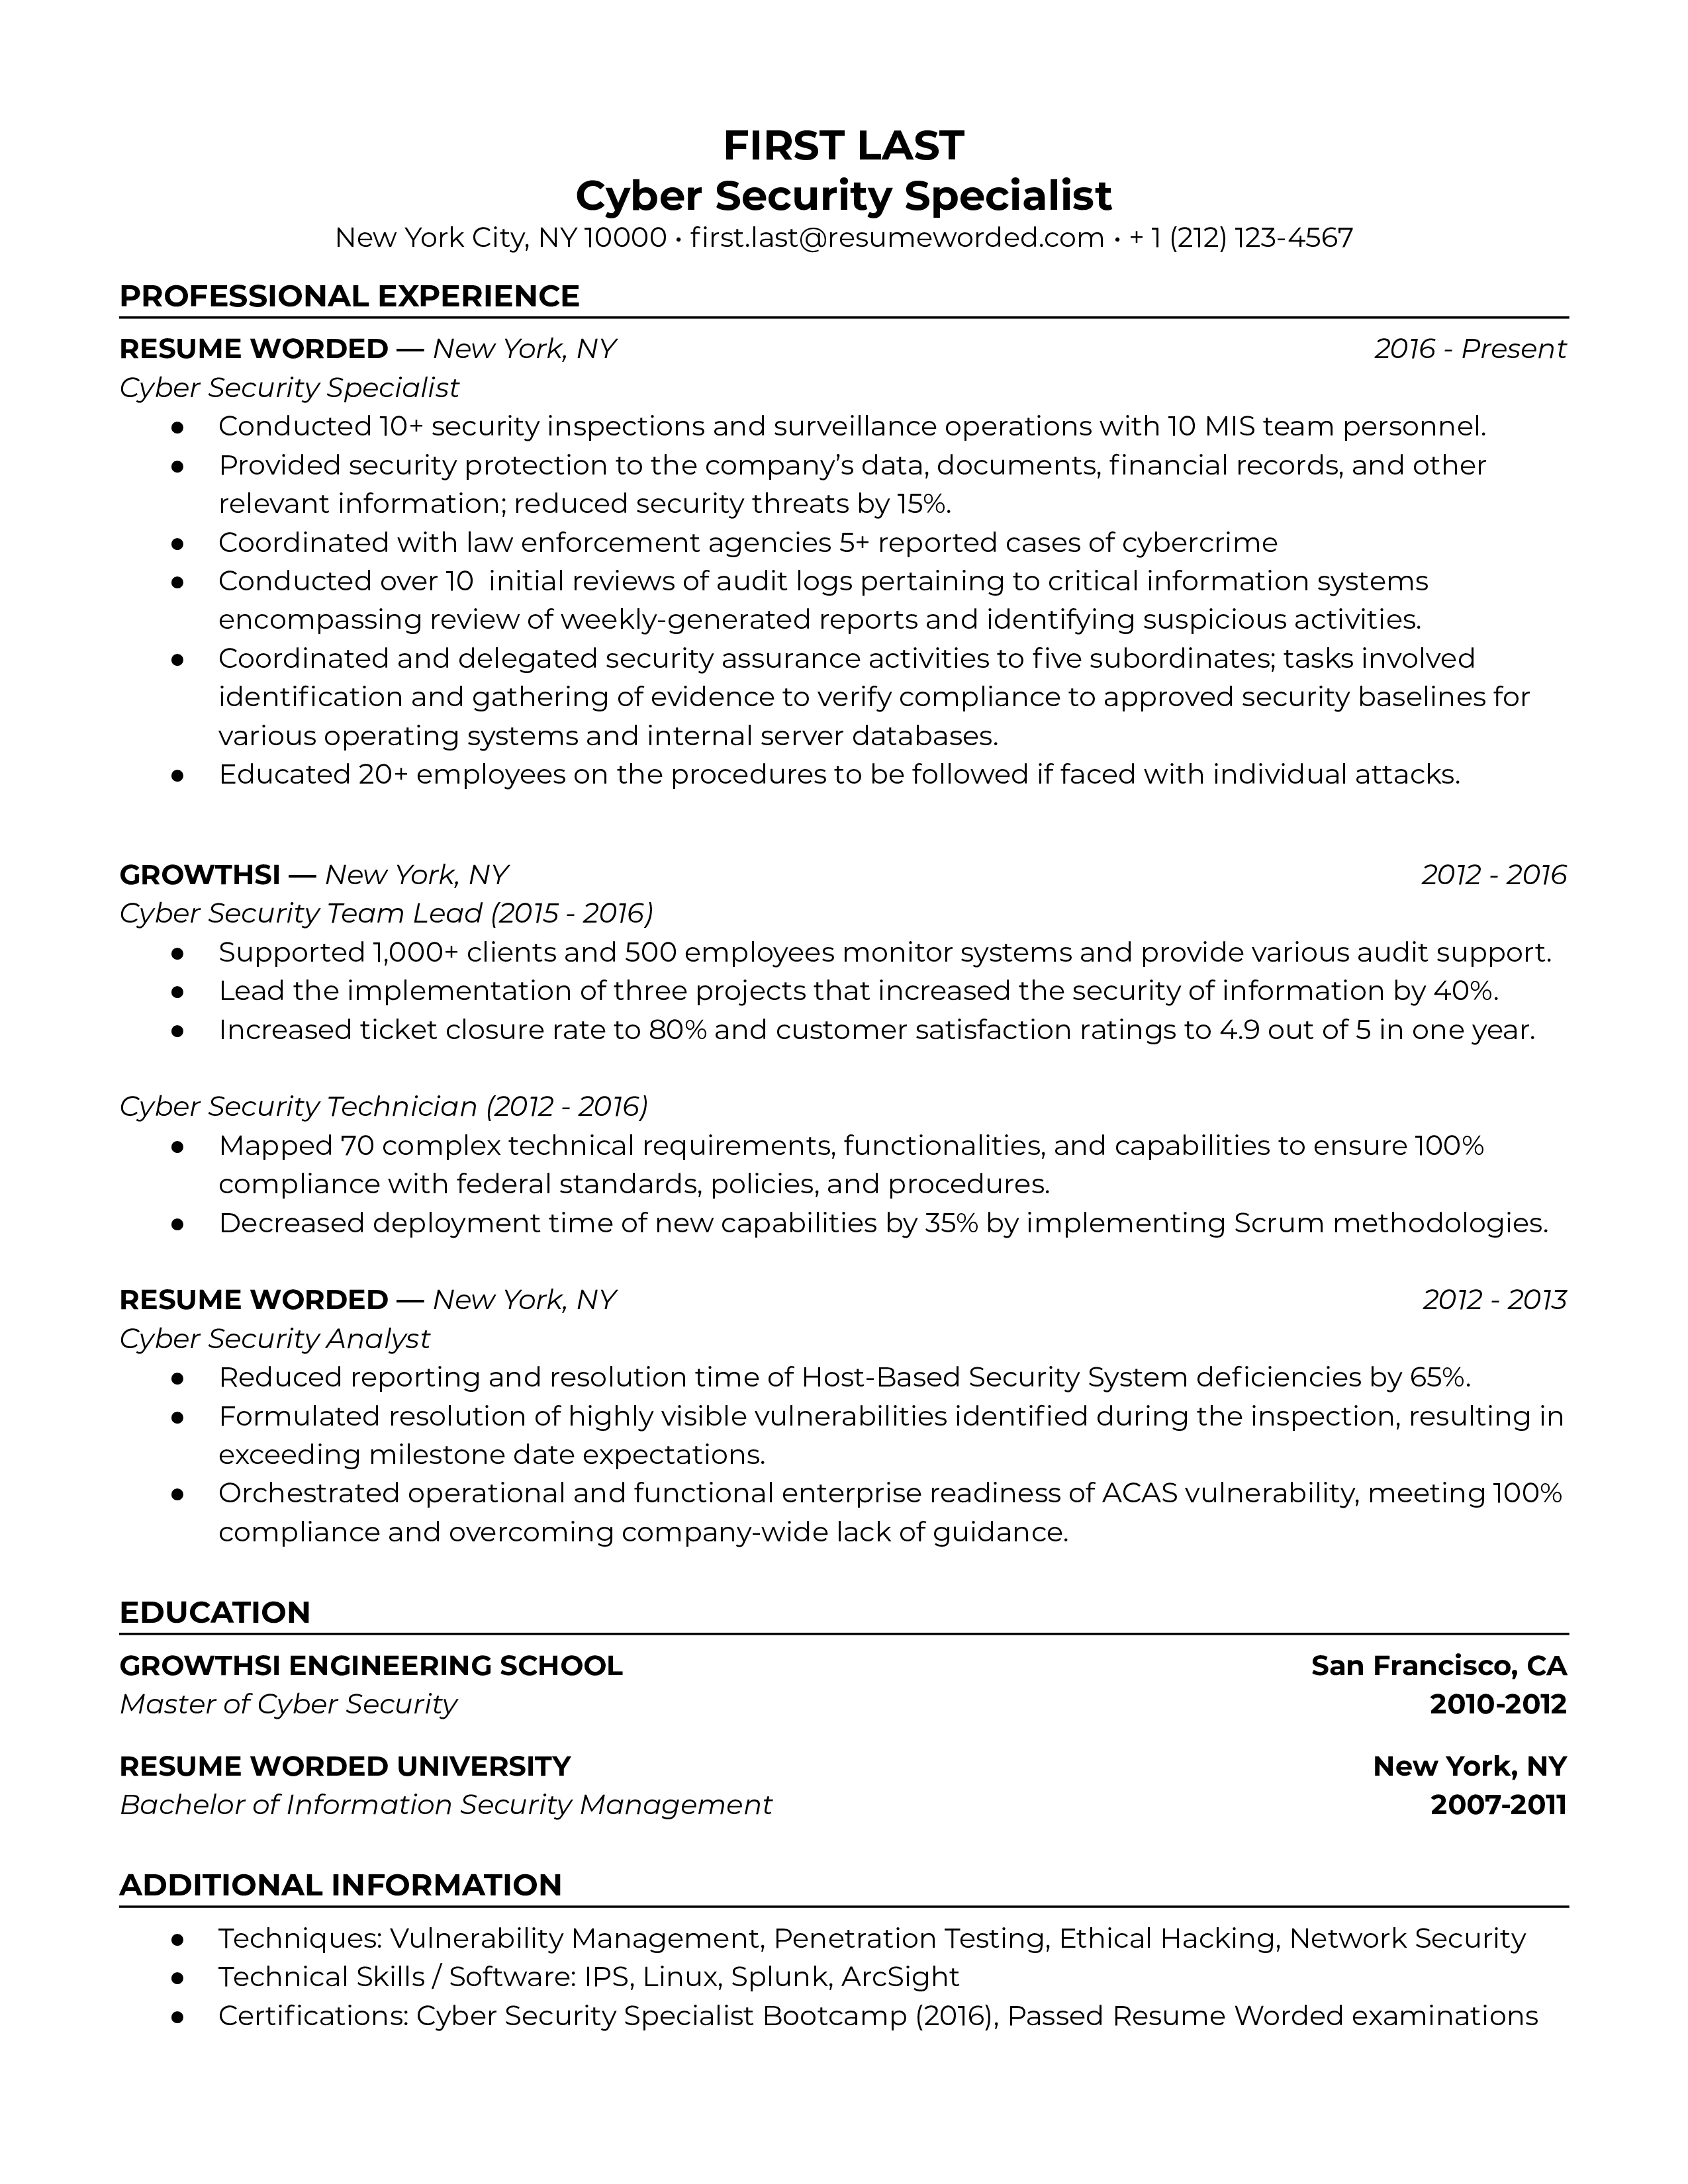 Cyber security specialist resume which prioritizes recent jobs and includes a job title